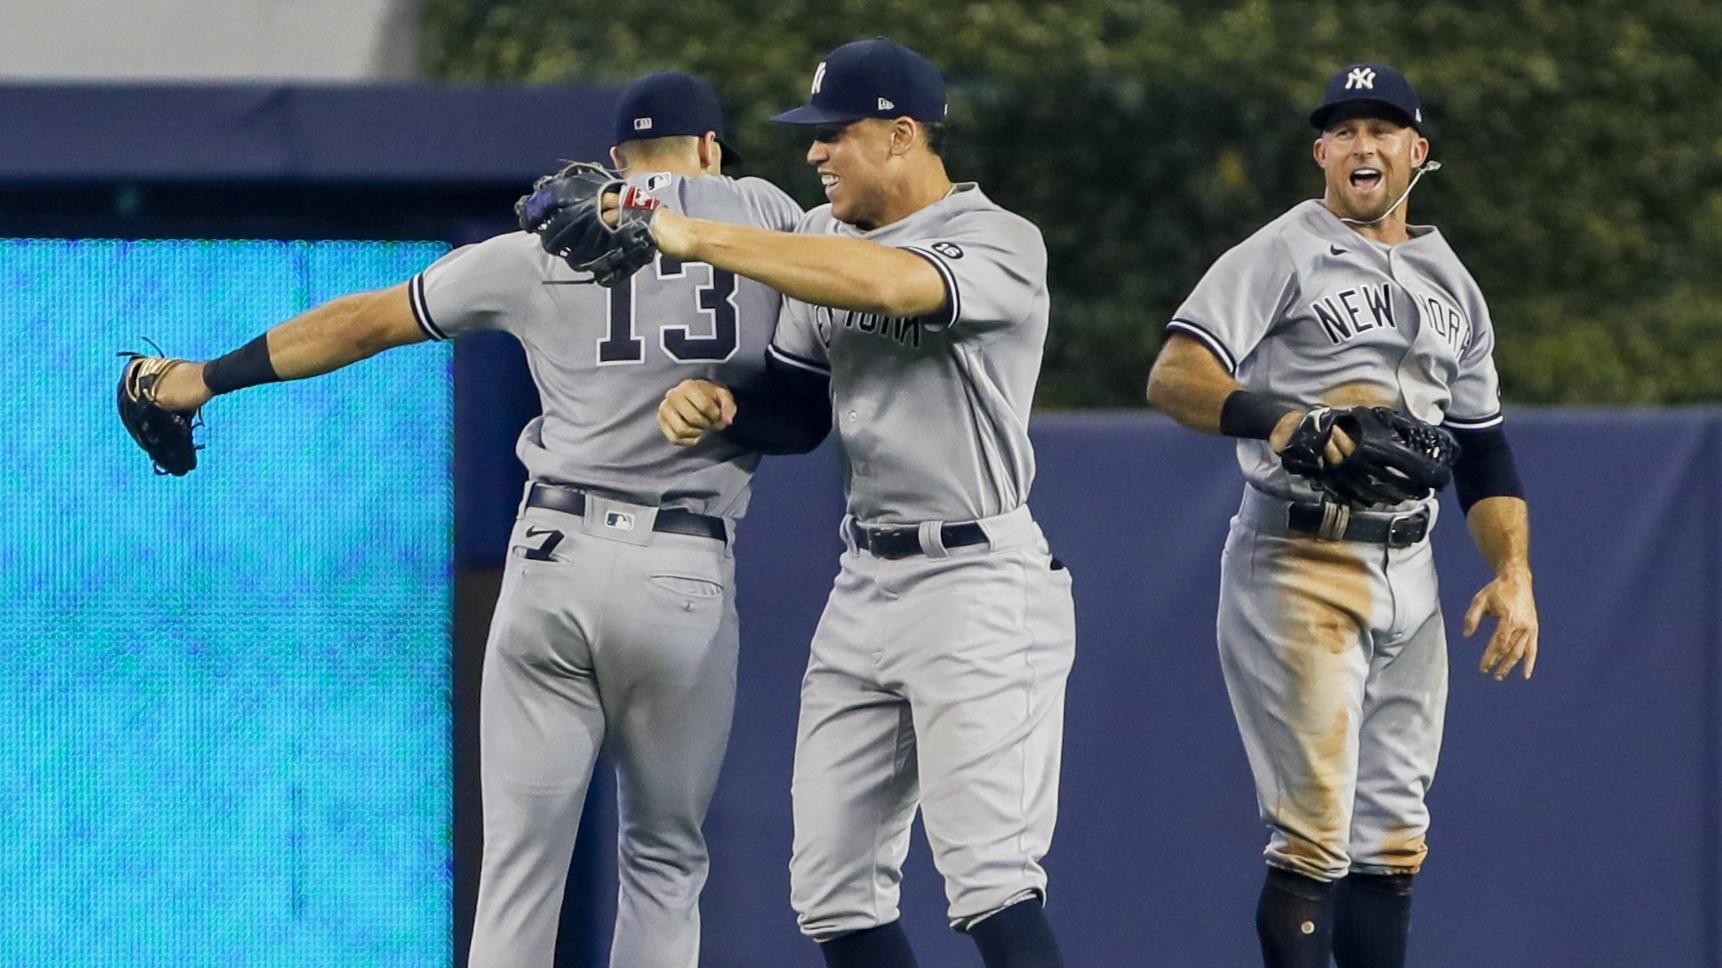 Aug 1, 2021; Miami, Florida, USA; New York Yankees center fielder Joey Gallo (13), and right fielder Aaron Judge (99) and left fielder Brett Gardner (11) celebrate after winning the game against the Miami Marlins at loanDepot Park. Mandatory Credit: Sam Navarro-USA TODAY Sports / © Sam Navarro-USA TODAY Sports